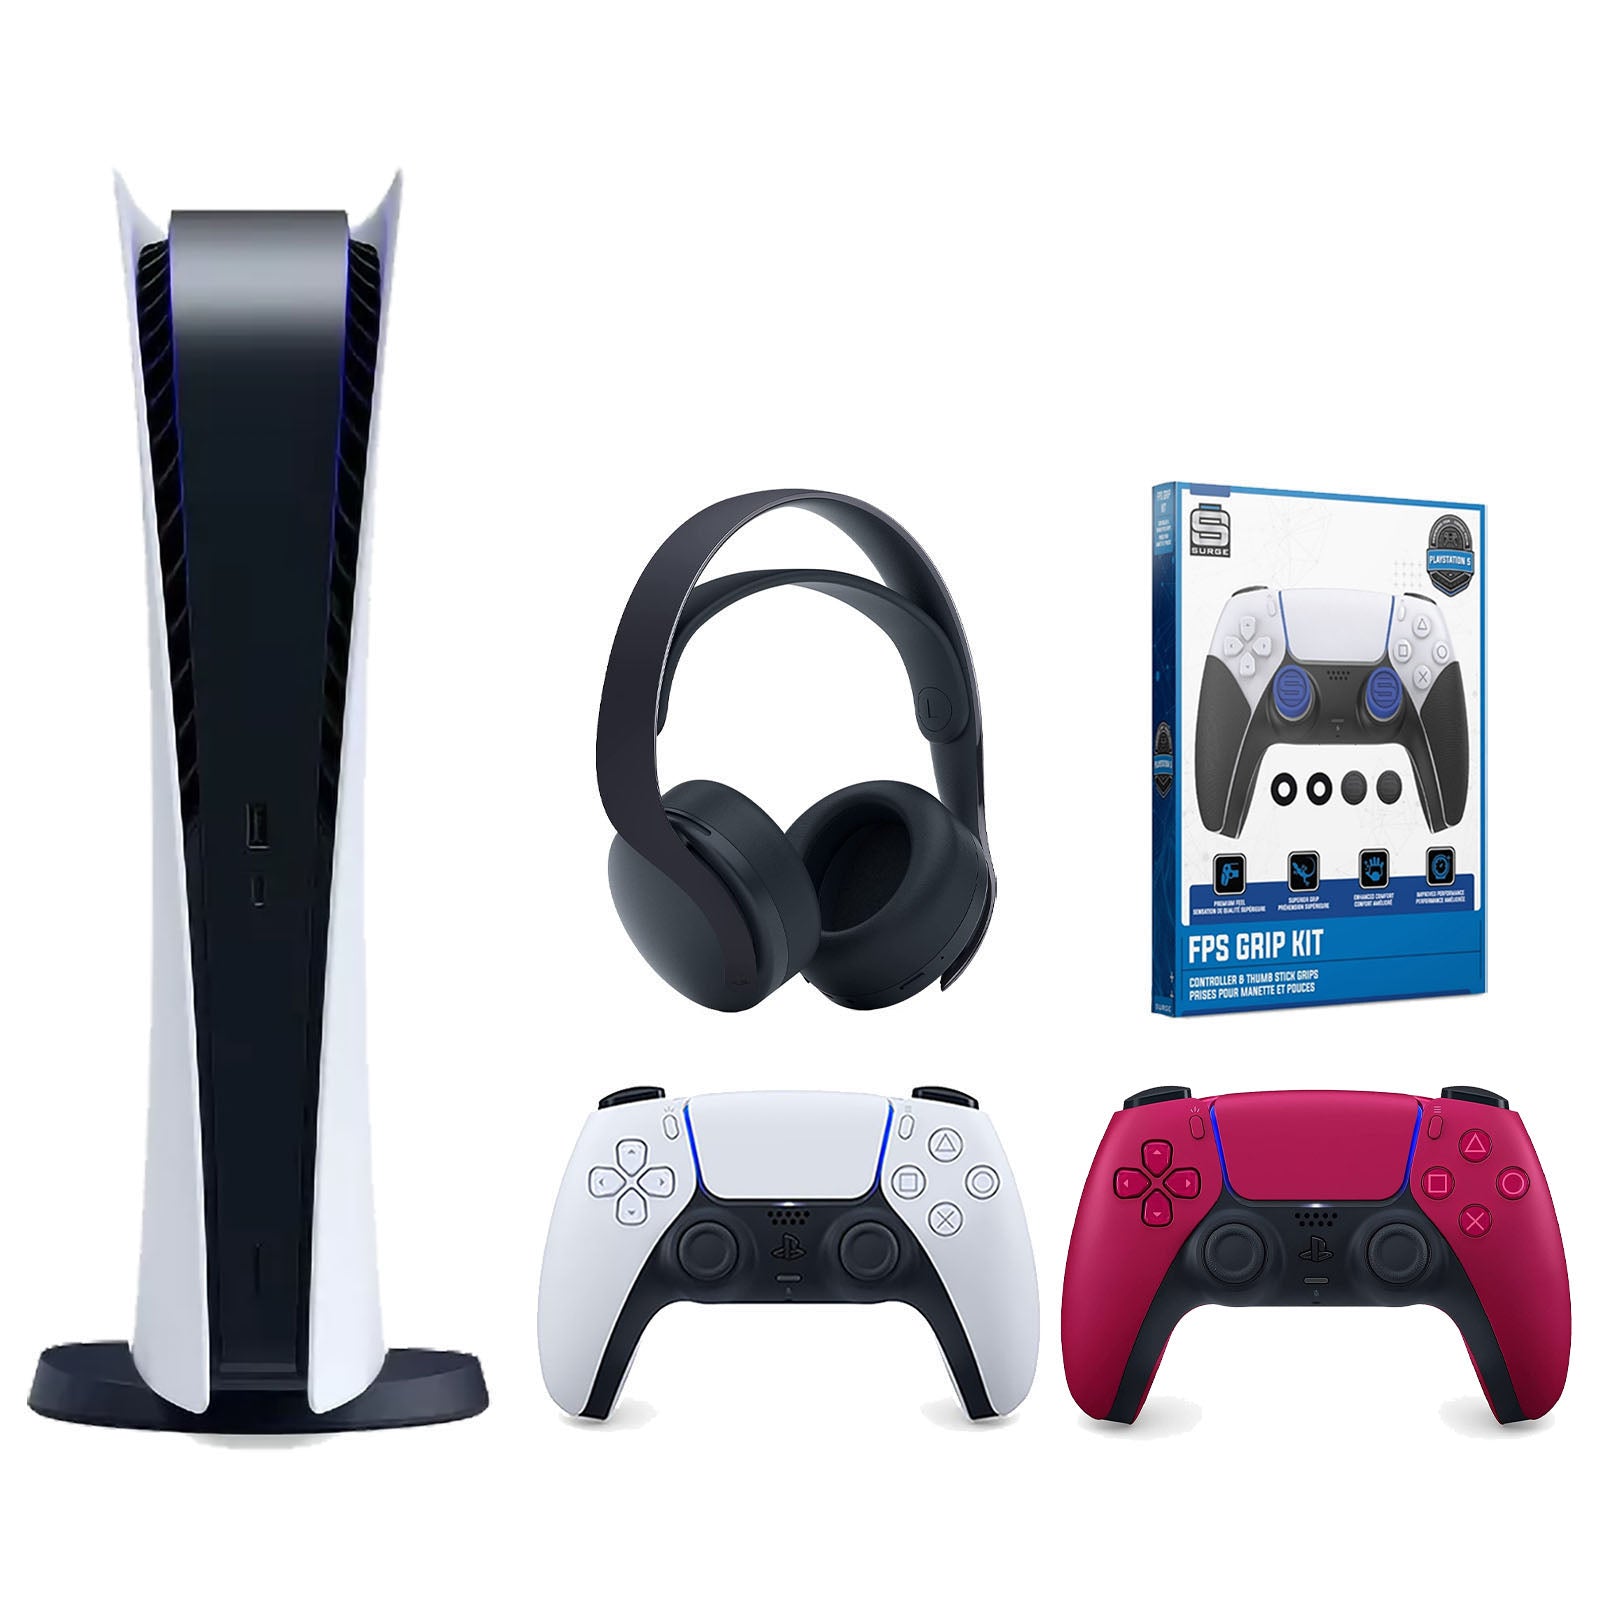 Sony Playstation 5 Digital Edition Console with Extra Red Controller, Black PULSE 3D Headset and Surge FPS Grip Kit With Precision Aiming Rings Bundle - Pro-Distributing